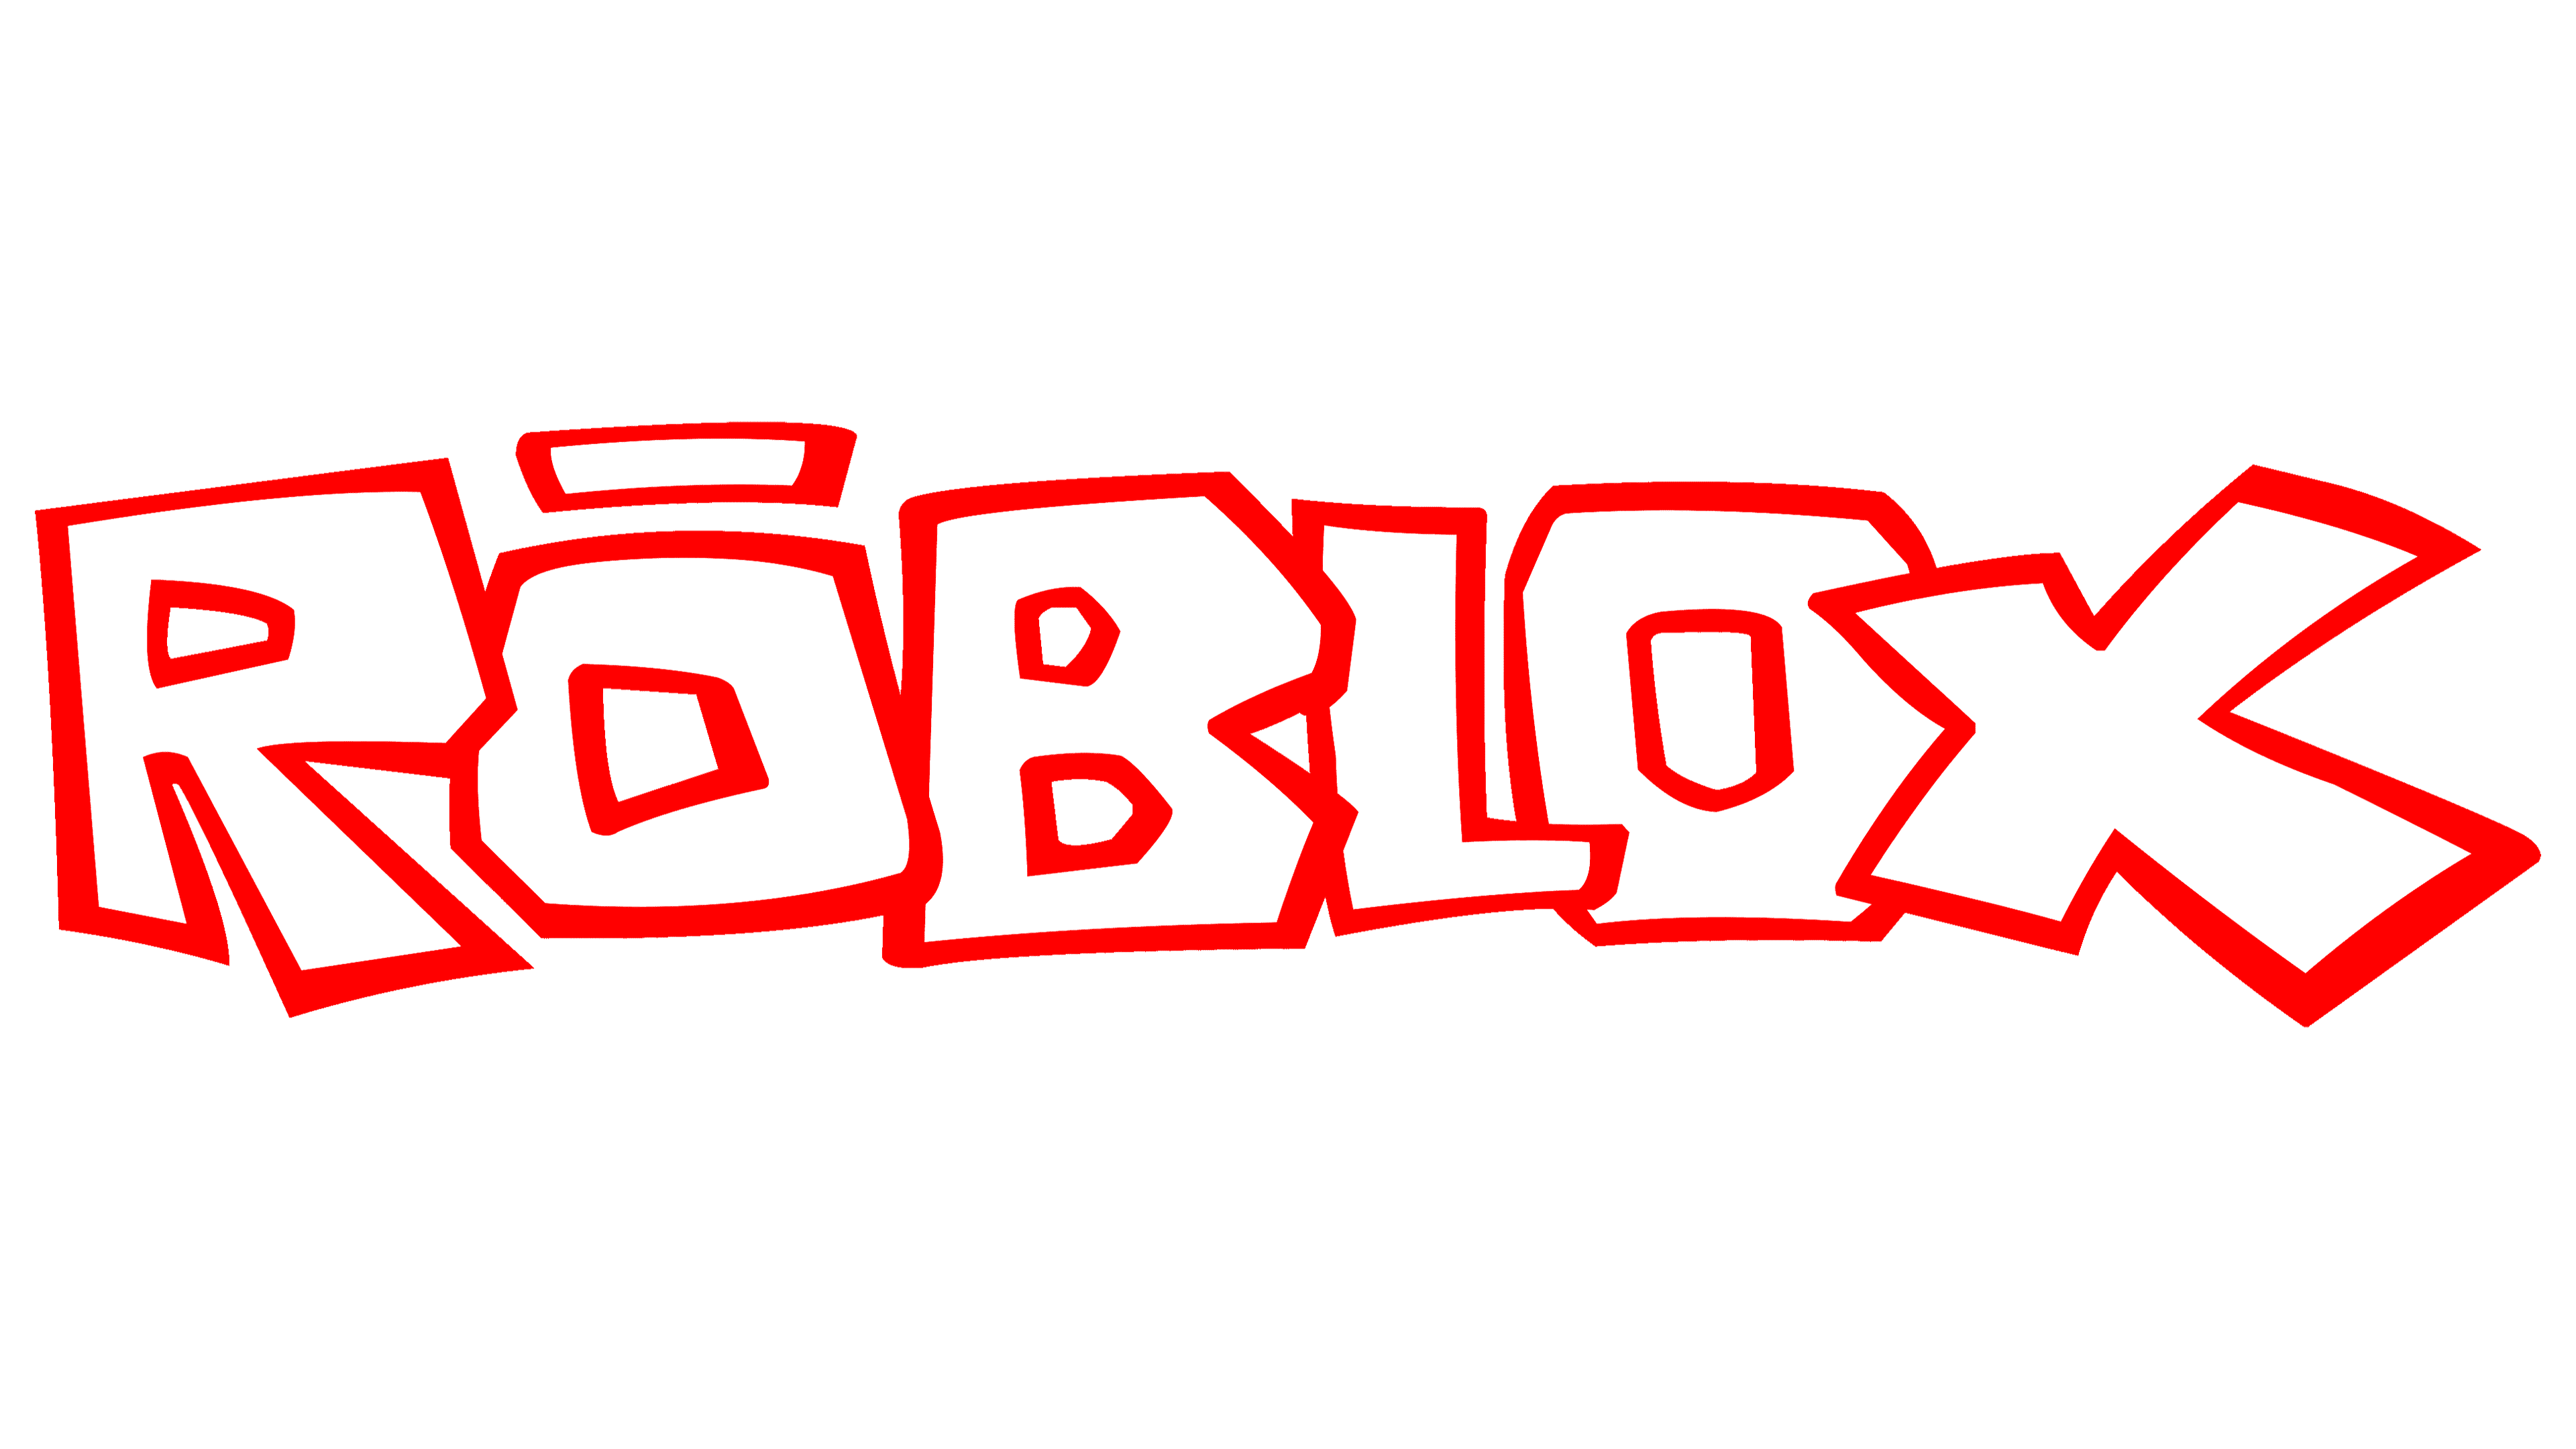 Roblox Logo and symbol, meaning